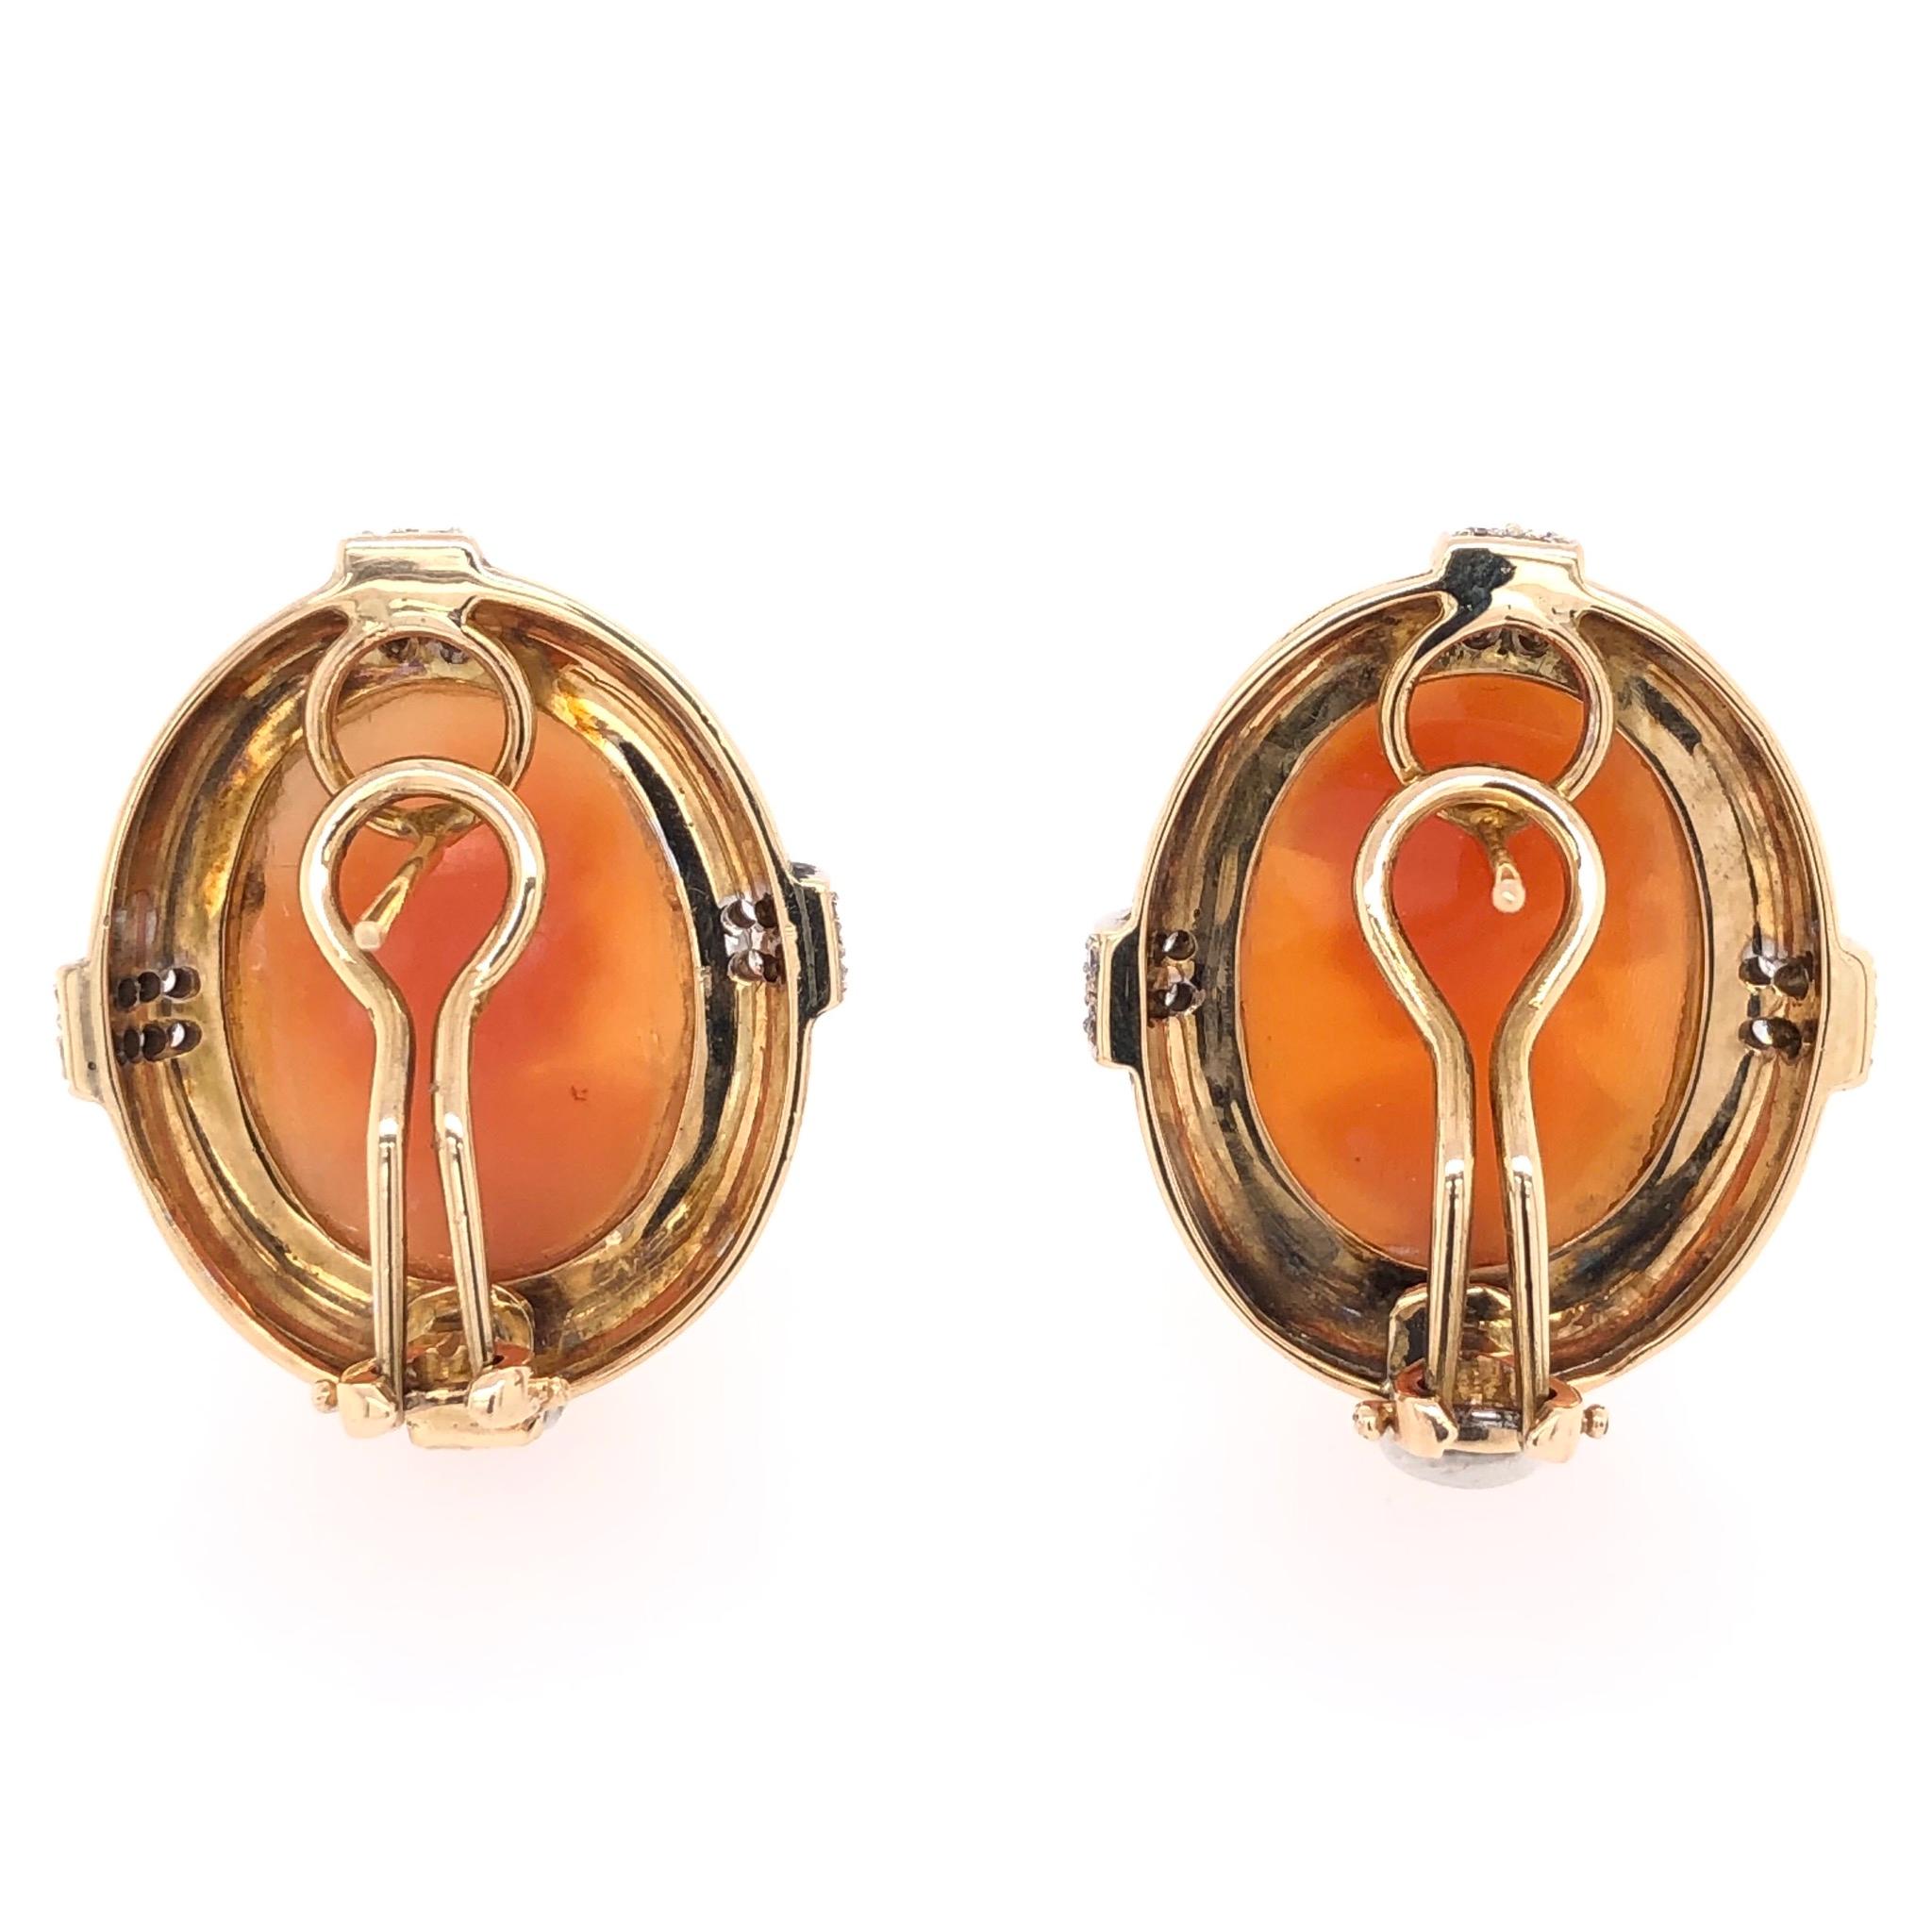 Lovely Hand Carved Shell Cameo Earrings, set in Beautiful Hand crafted 14 Karat Yellow Gold surrounds, accented by Diamonds, approx. 0.64tcw. Measuring approx. 1.1” tall. In excellent condition, recently professionally cleaned and polished. These